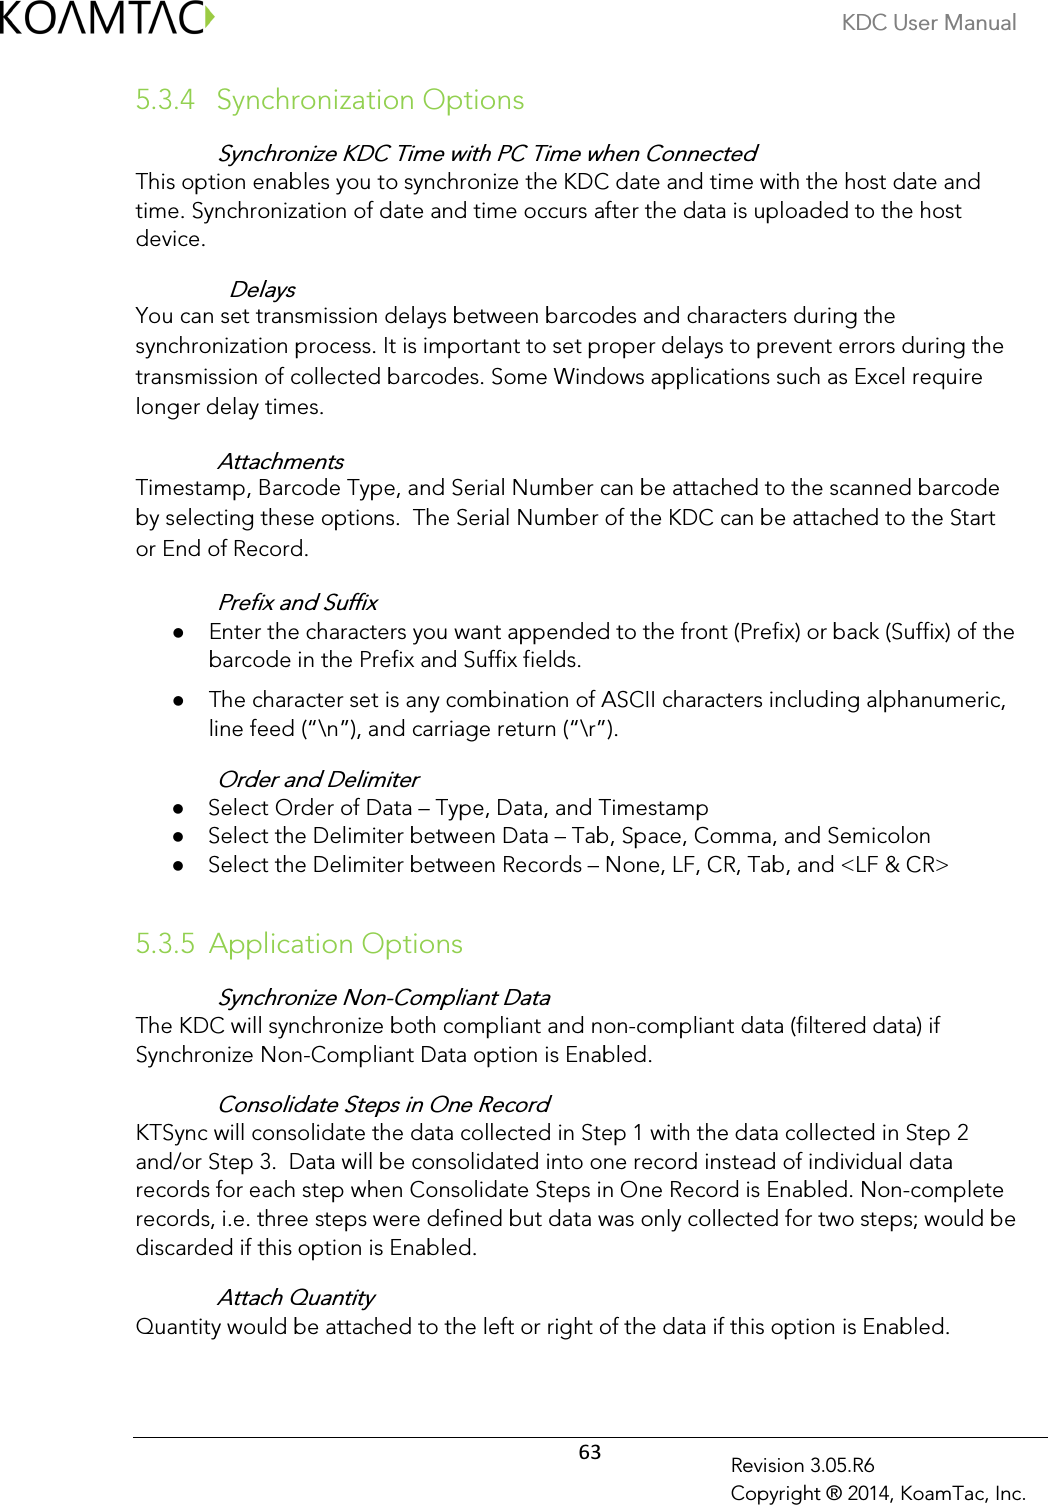 KDC User Manual  63 Revision 3.05.R6 Copyright ® 2014, KoamTac, Inc. 5.3.4  Synchronization Options Synchronize KDC Time with PC Time when Connected This option enables you to synchronize the KDC date and time with the host date and time. Synchronization of date and time occurs after the data is uploaded to the host device.   Delays You can set transmission delays between barcodes and characters during the synchronization process. It is important to set proper delays to prevent errors during the transmission of collected barcodes. Some Windows applications such as Excel require longer delay times. Attachments Timestamp, Barcode Type, and Serial Number can be attached to the scanned barcode by selecting these options.  The Serial Number of the KDC can be attached to the Start or End of Record. Prefix and Suffix  Enter the characters you want appended to the front (Prefix) or back (Suffix) of the barcode in the Prefix and Suffix fields.   The character set is any combination of ASCII characters including alphanumeric, line feed (“\n”), and carriage return (“\r”). Order and Delimiter  Select Order of Data – Type, Data, and Timestamp  Select the Delimiter between Data – Tab, Space, Comma, and Semicolon  Select the Delimiter between Records – None, LF, CR, Tab, and &lt;LF &amp; CR&gt;  5.3.5 Application Options Synchronize Non-Compliant Data The KDC will synchronize both compliant and non-compliant data (filtered data) if Synchronize Non-Compliant Data option is Enabled. Consolidate Steps in One Record KTSync will consolidate the data collected in Step 1 with the data collected in Step 2 and/or Step 3.  Data will be consolidated into one record instead of individual data records for each step when Consolidate Steps in One Record is Enabled. Non-complete records, i.e. three steps were defined but data was only collected for two steps; would be discarded if this option is Enabled. Attach Quantity Quantity would be attached to the left or right of the data if this option is Enabled. 